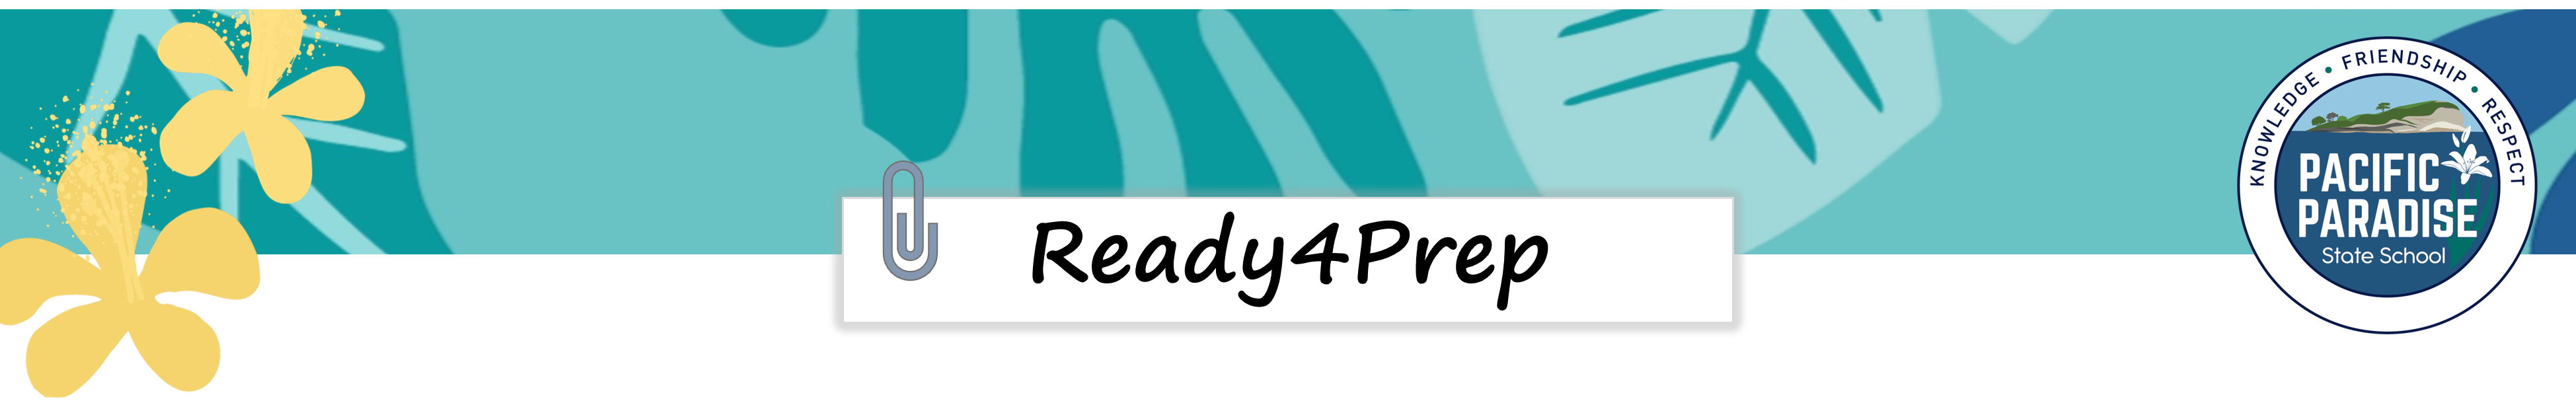 Ready4prep with logo.png